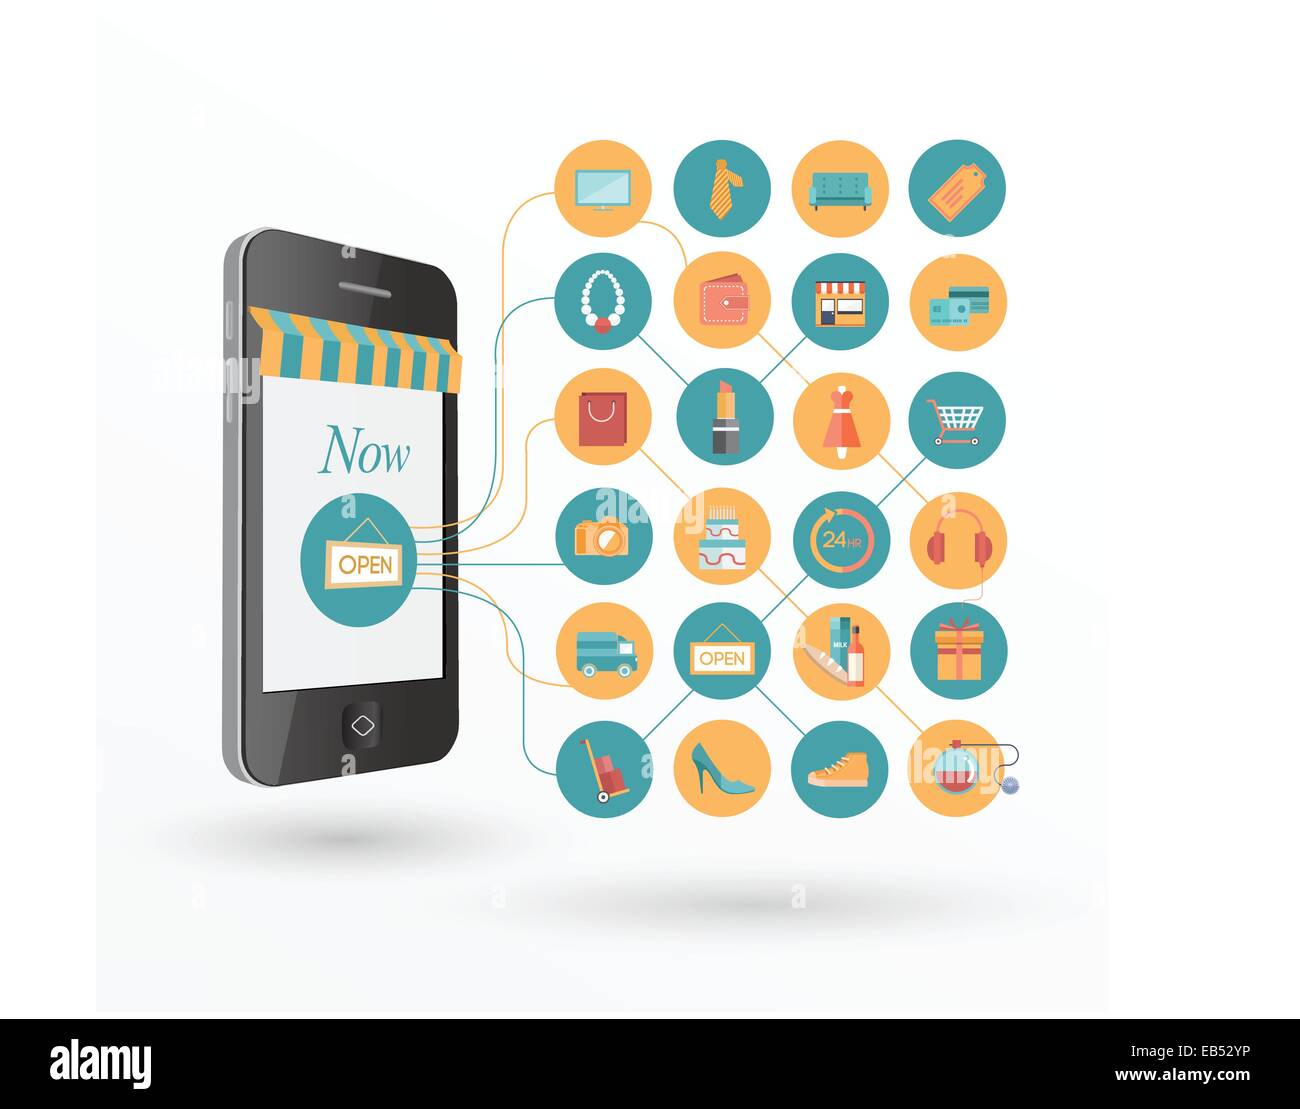 Online shopping concept with icons and smartphone Stock Vector